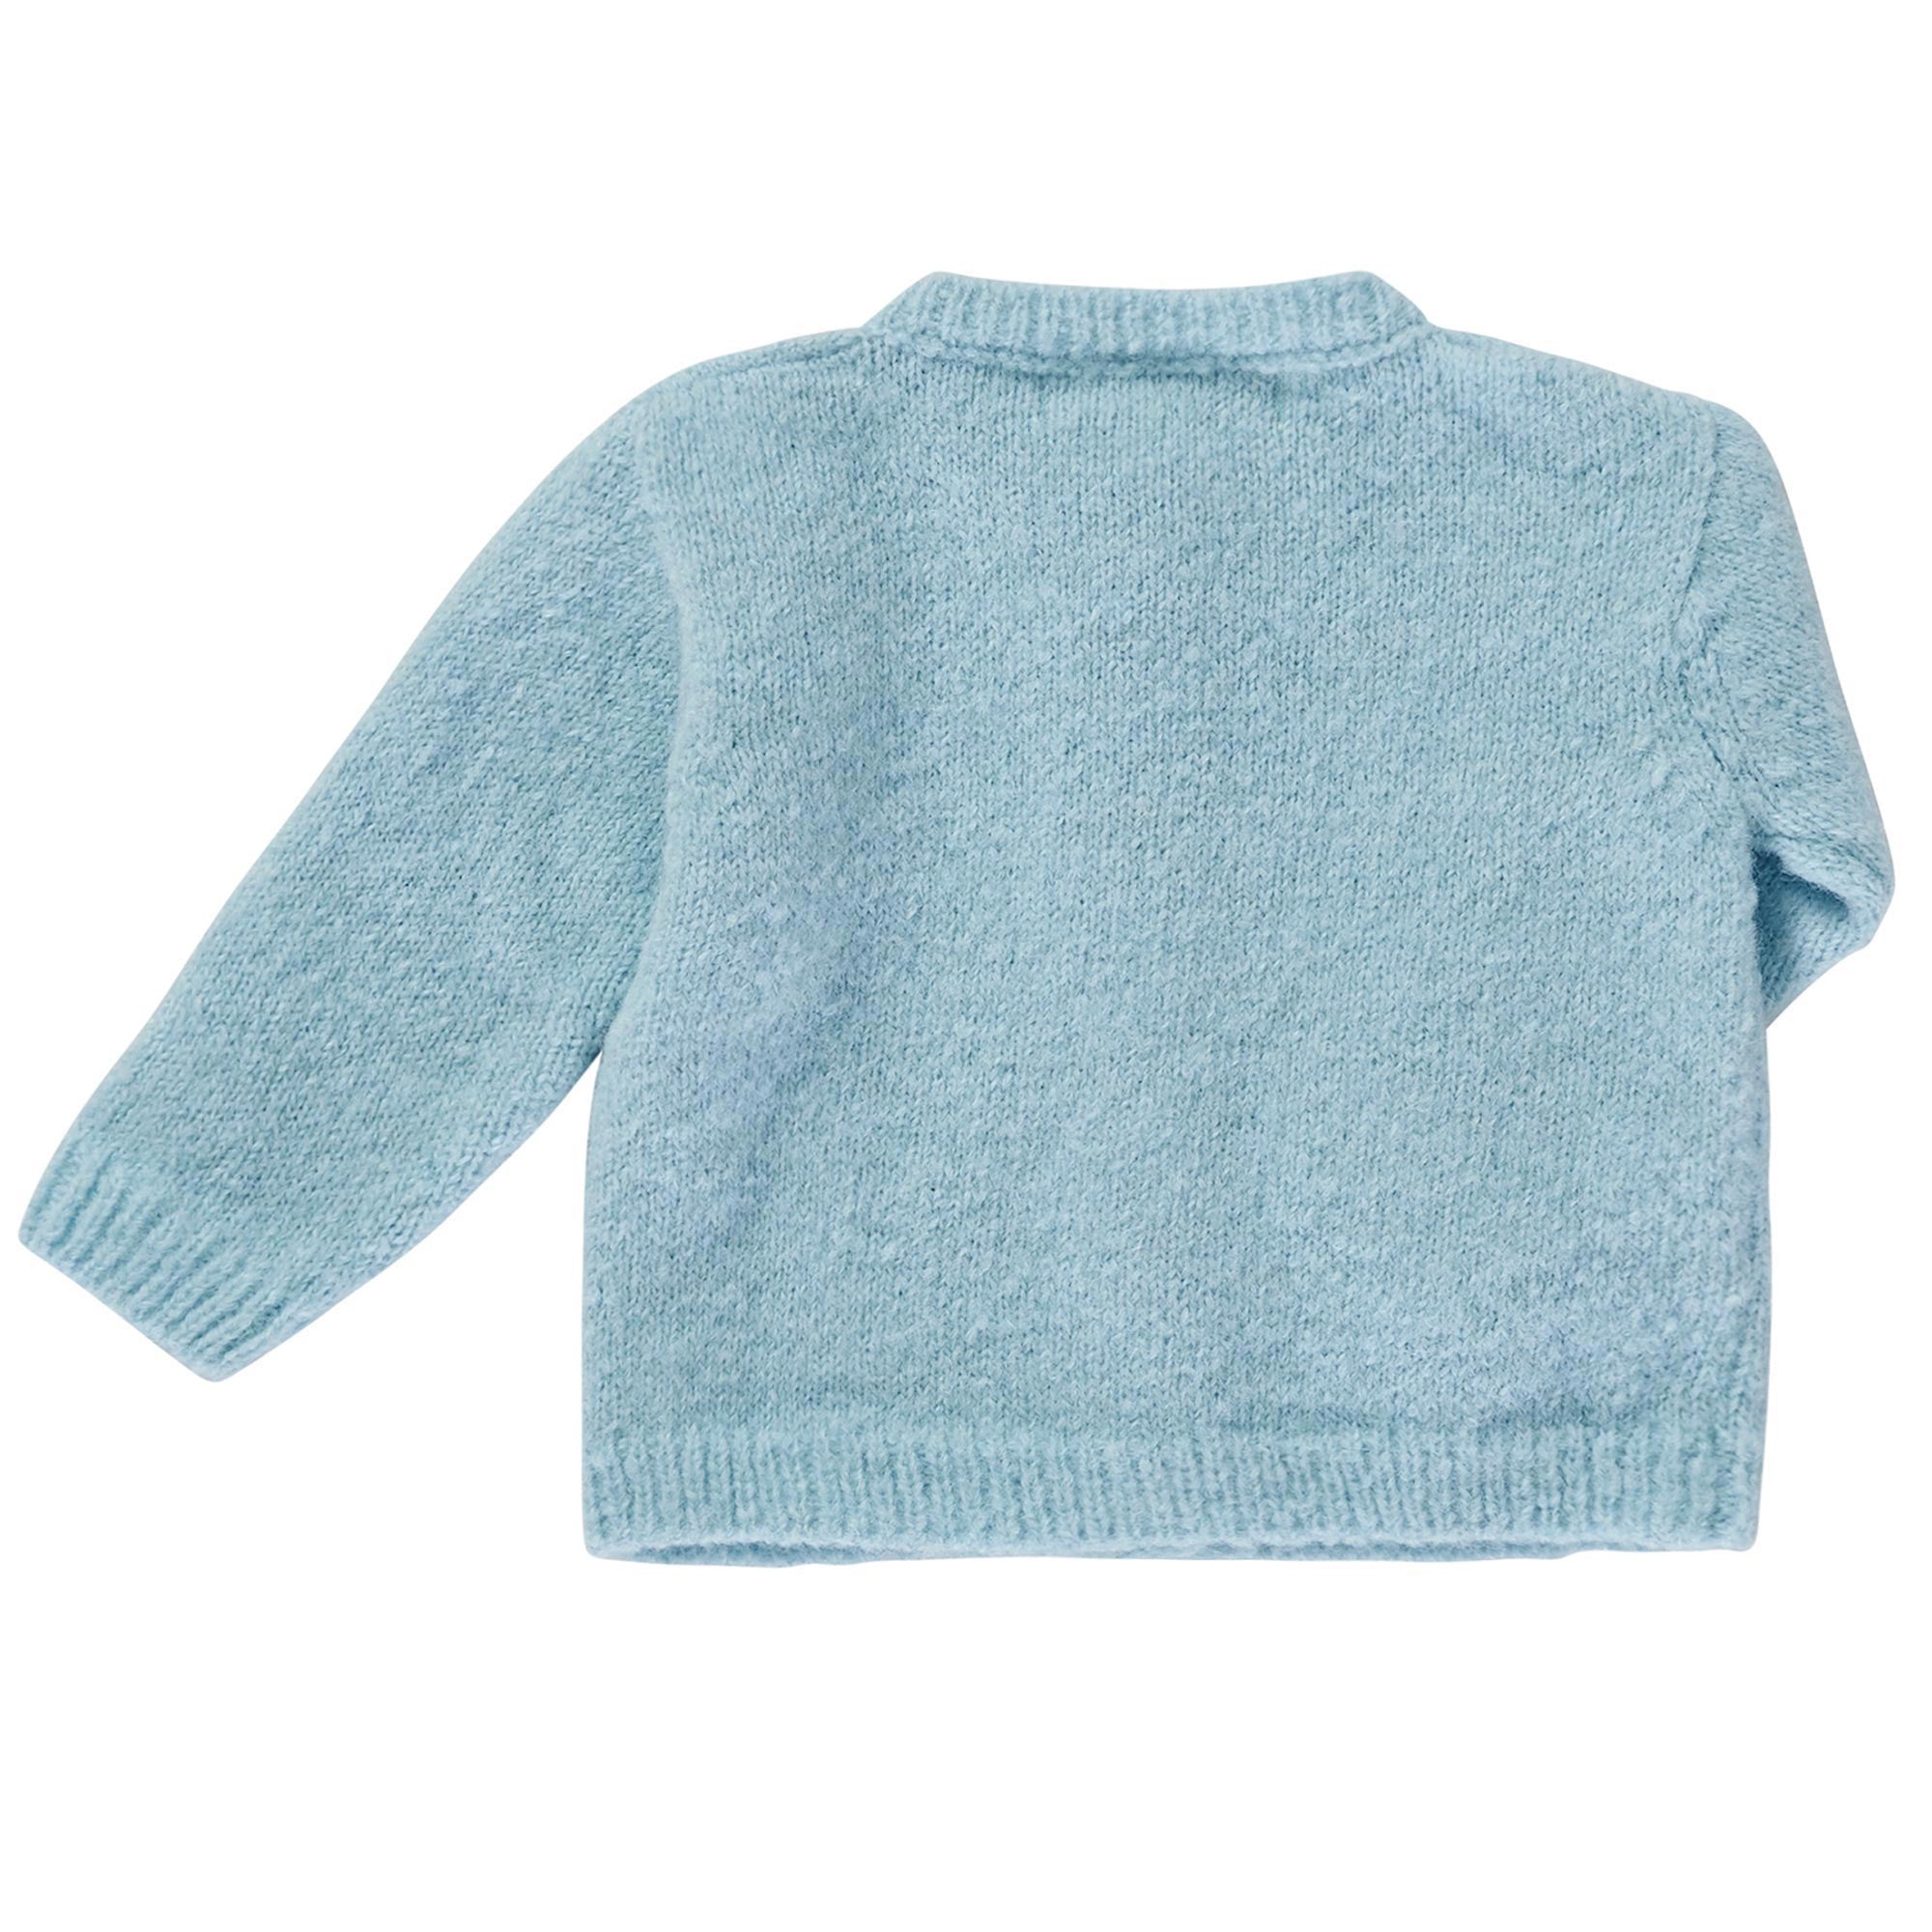 Baby Boys Ice Blue Knitted Cardigans - CÉMAROSE | Children's Fashion Store - 2